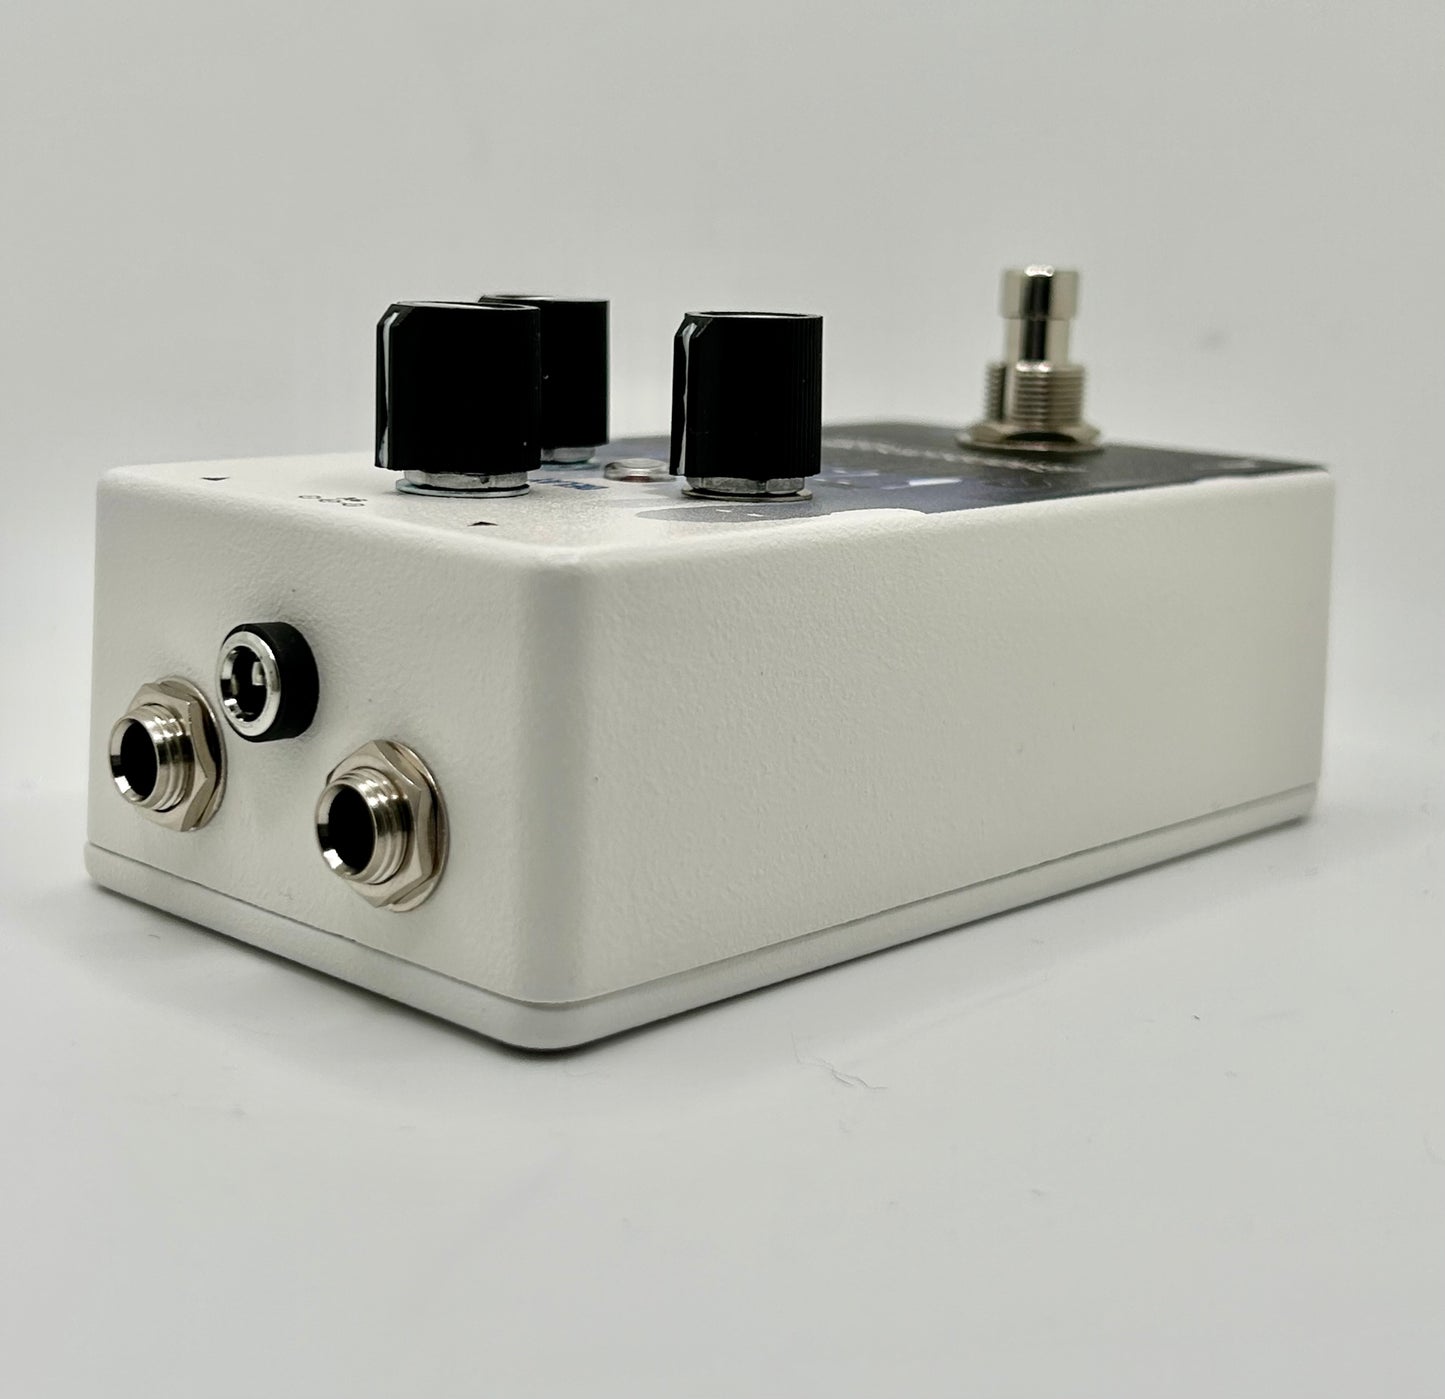 Humanoid Shadows - Bright and Clear Delay Pedal